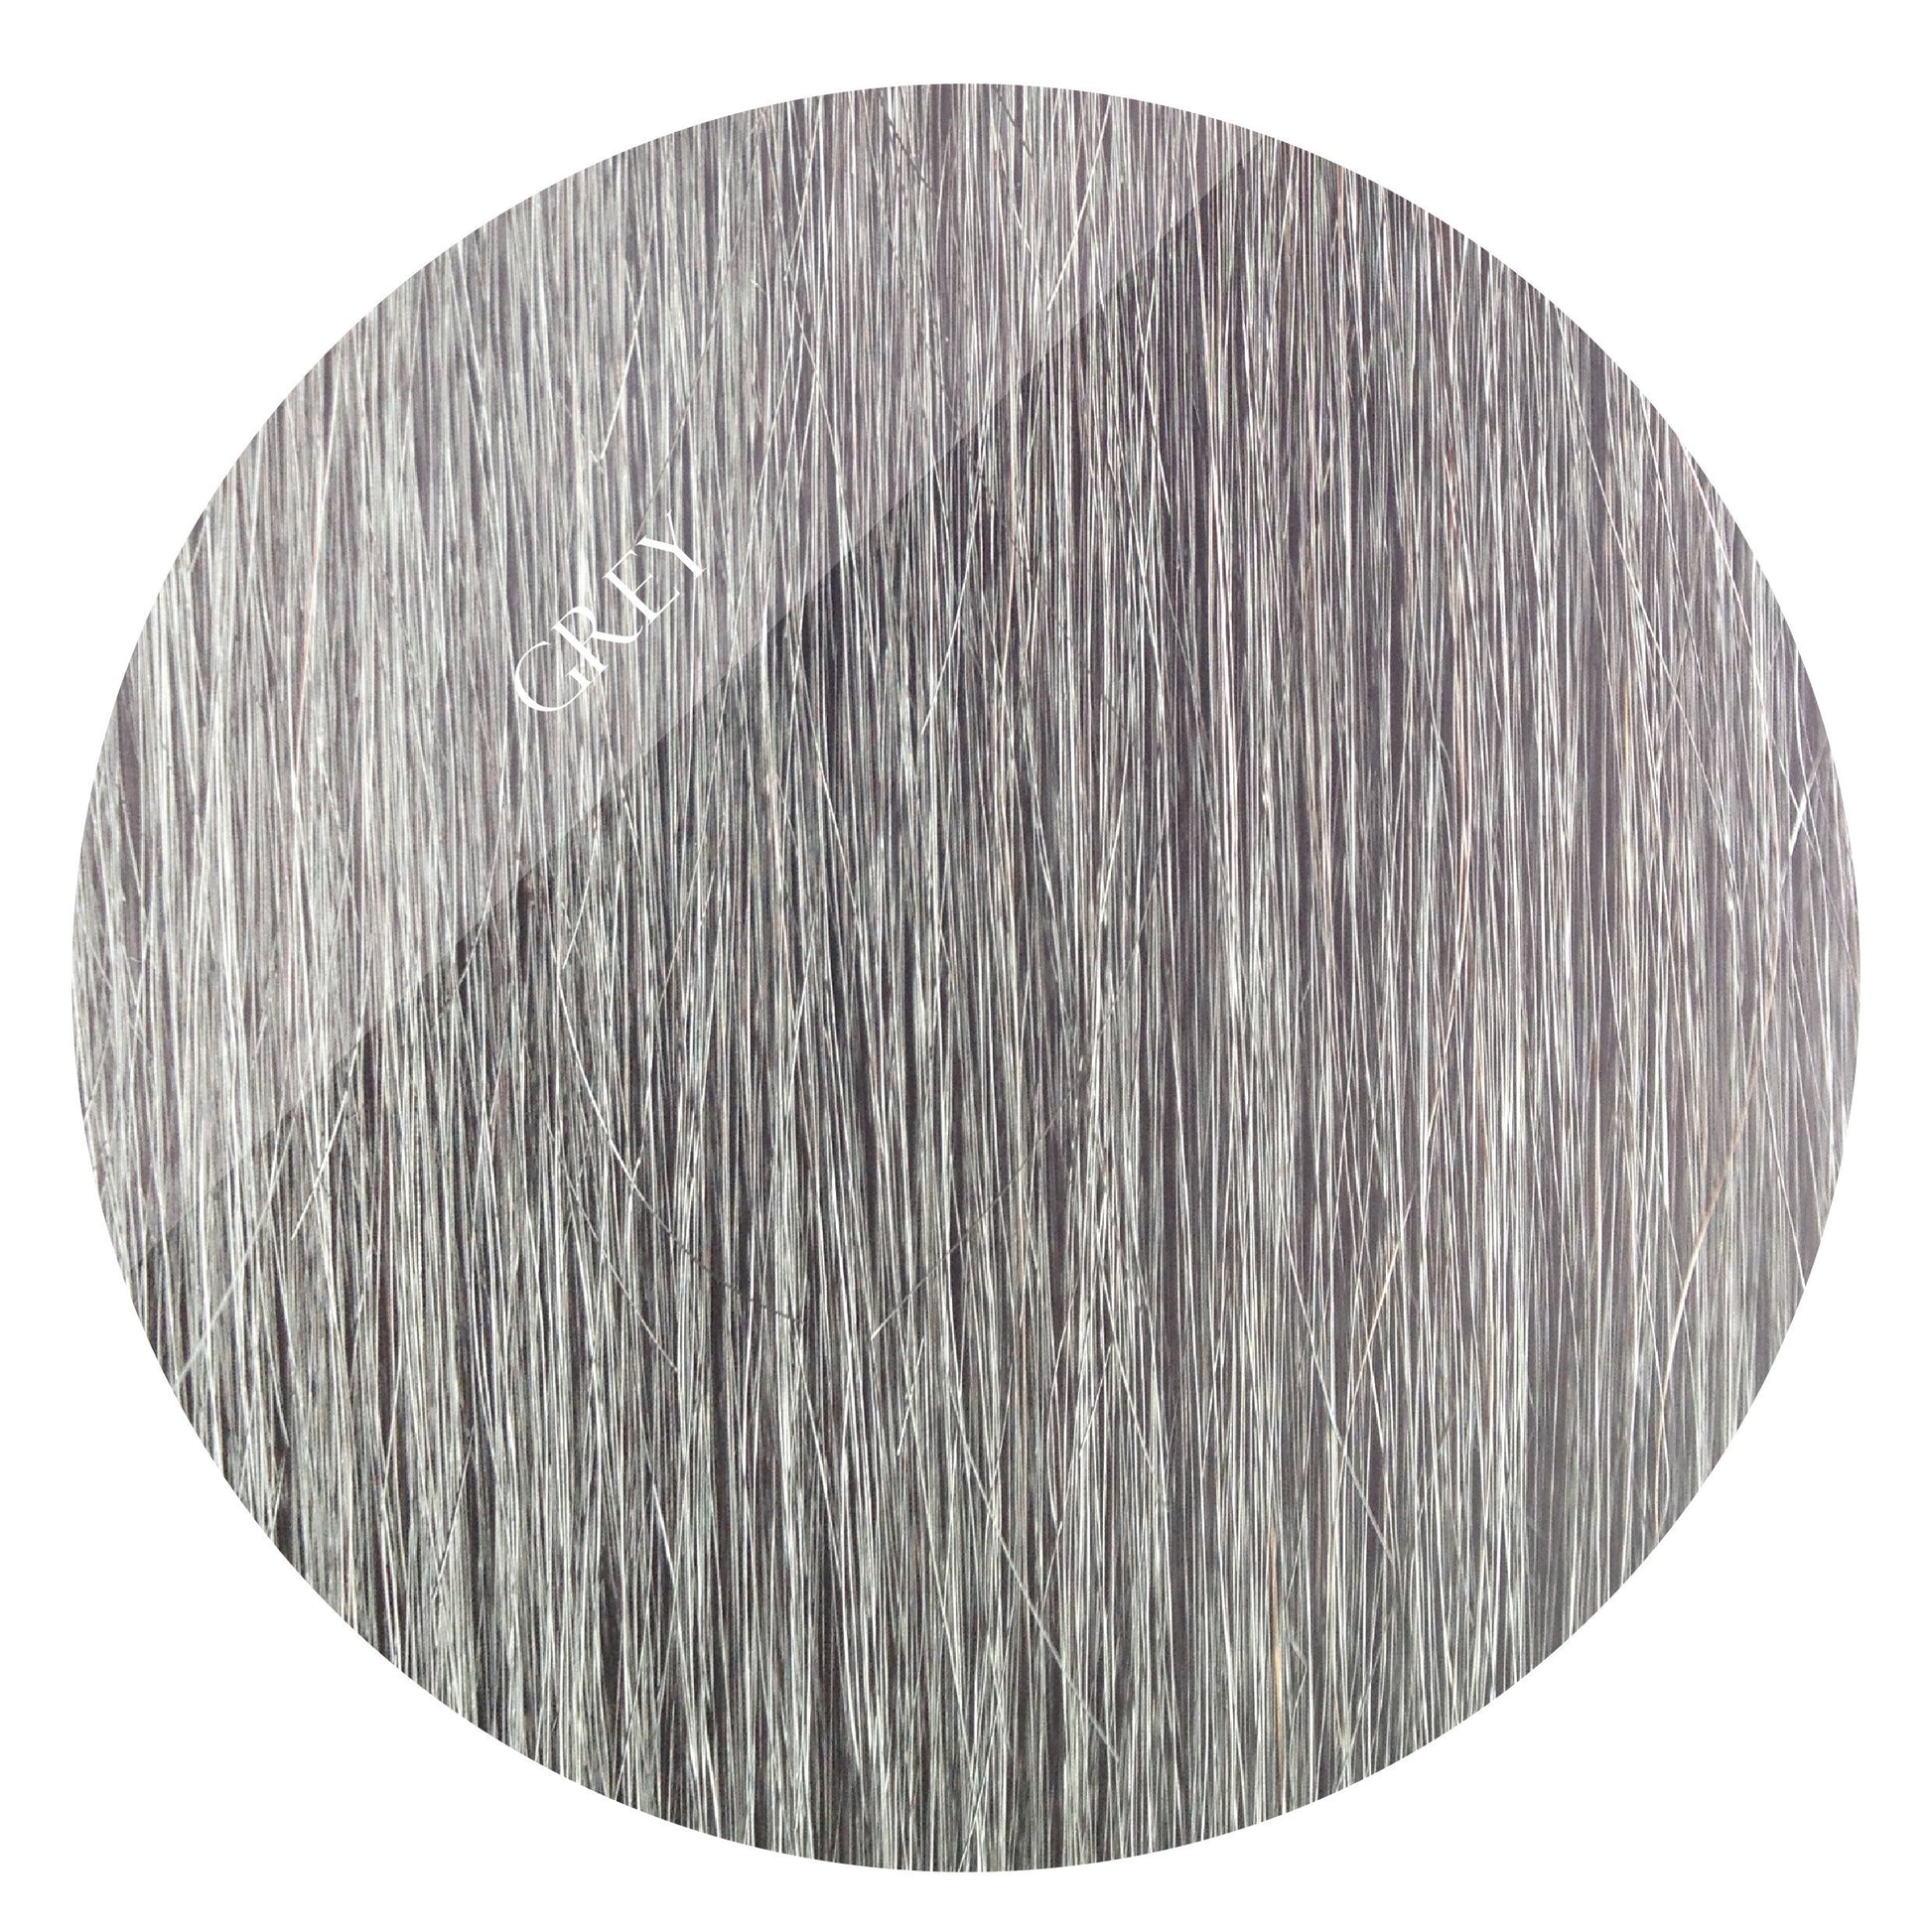 grey storm halo hair extensions 20inch deluxe